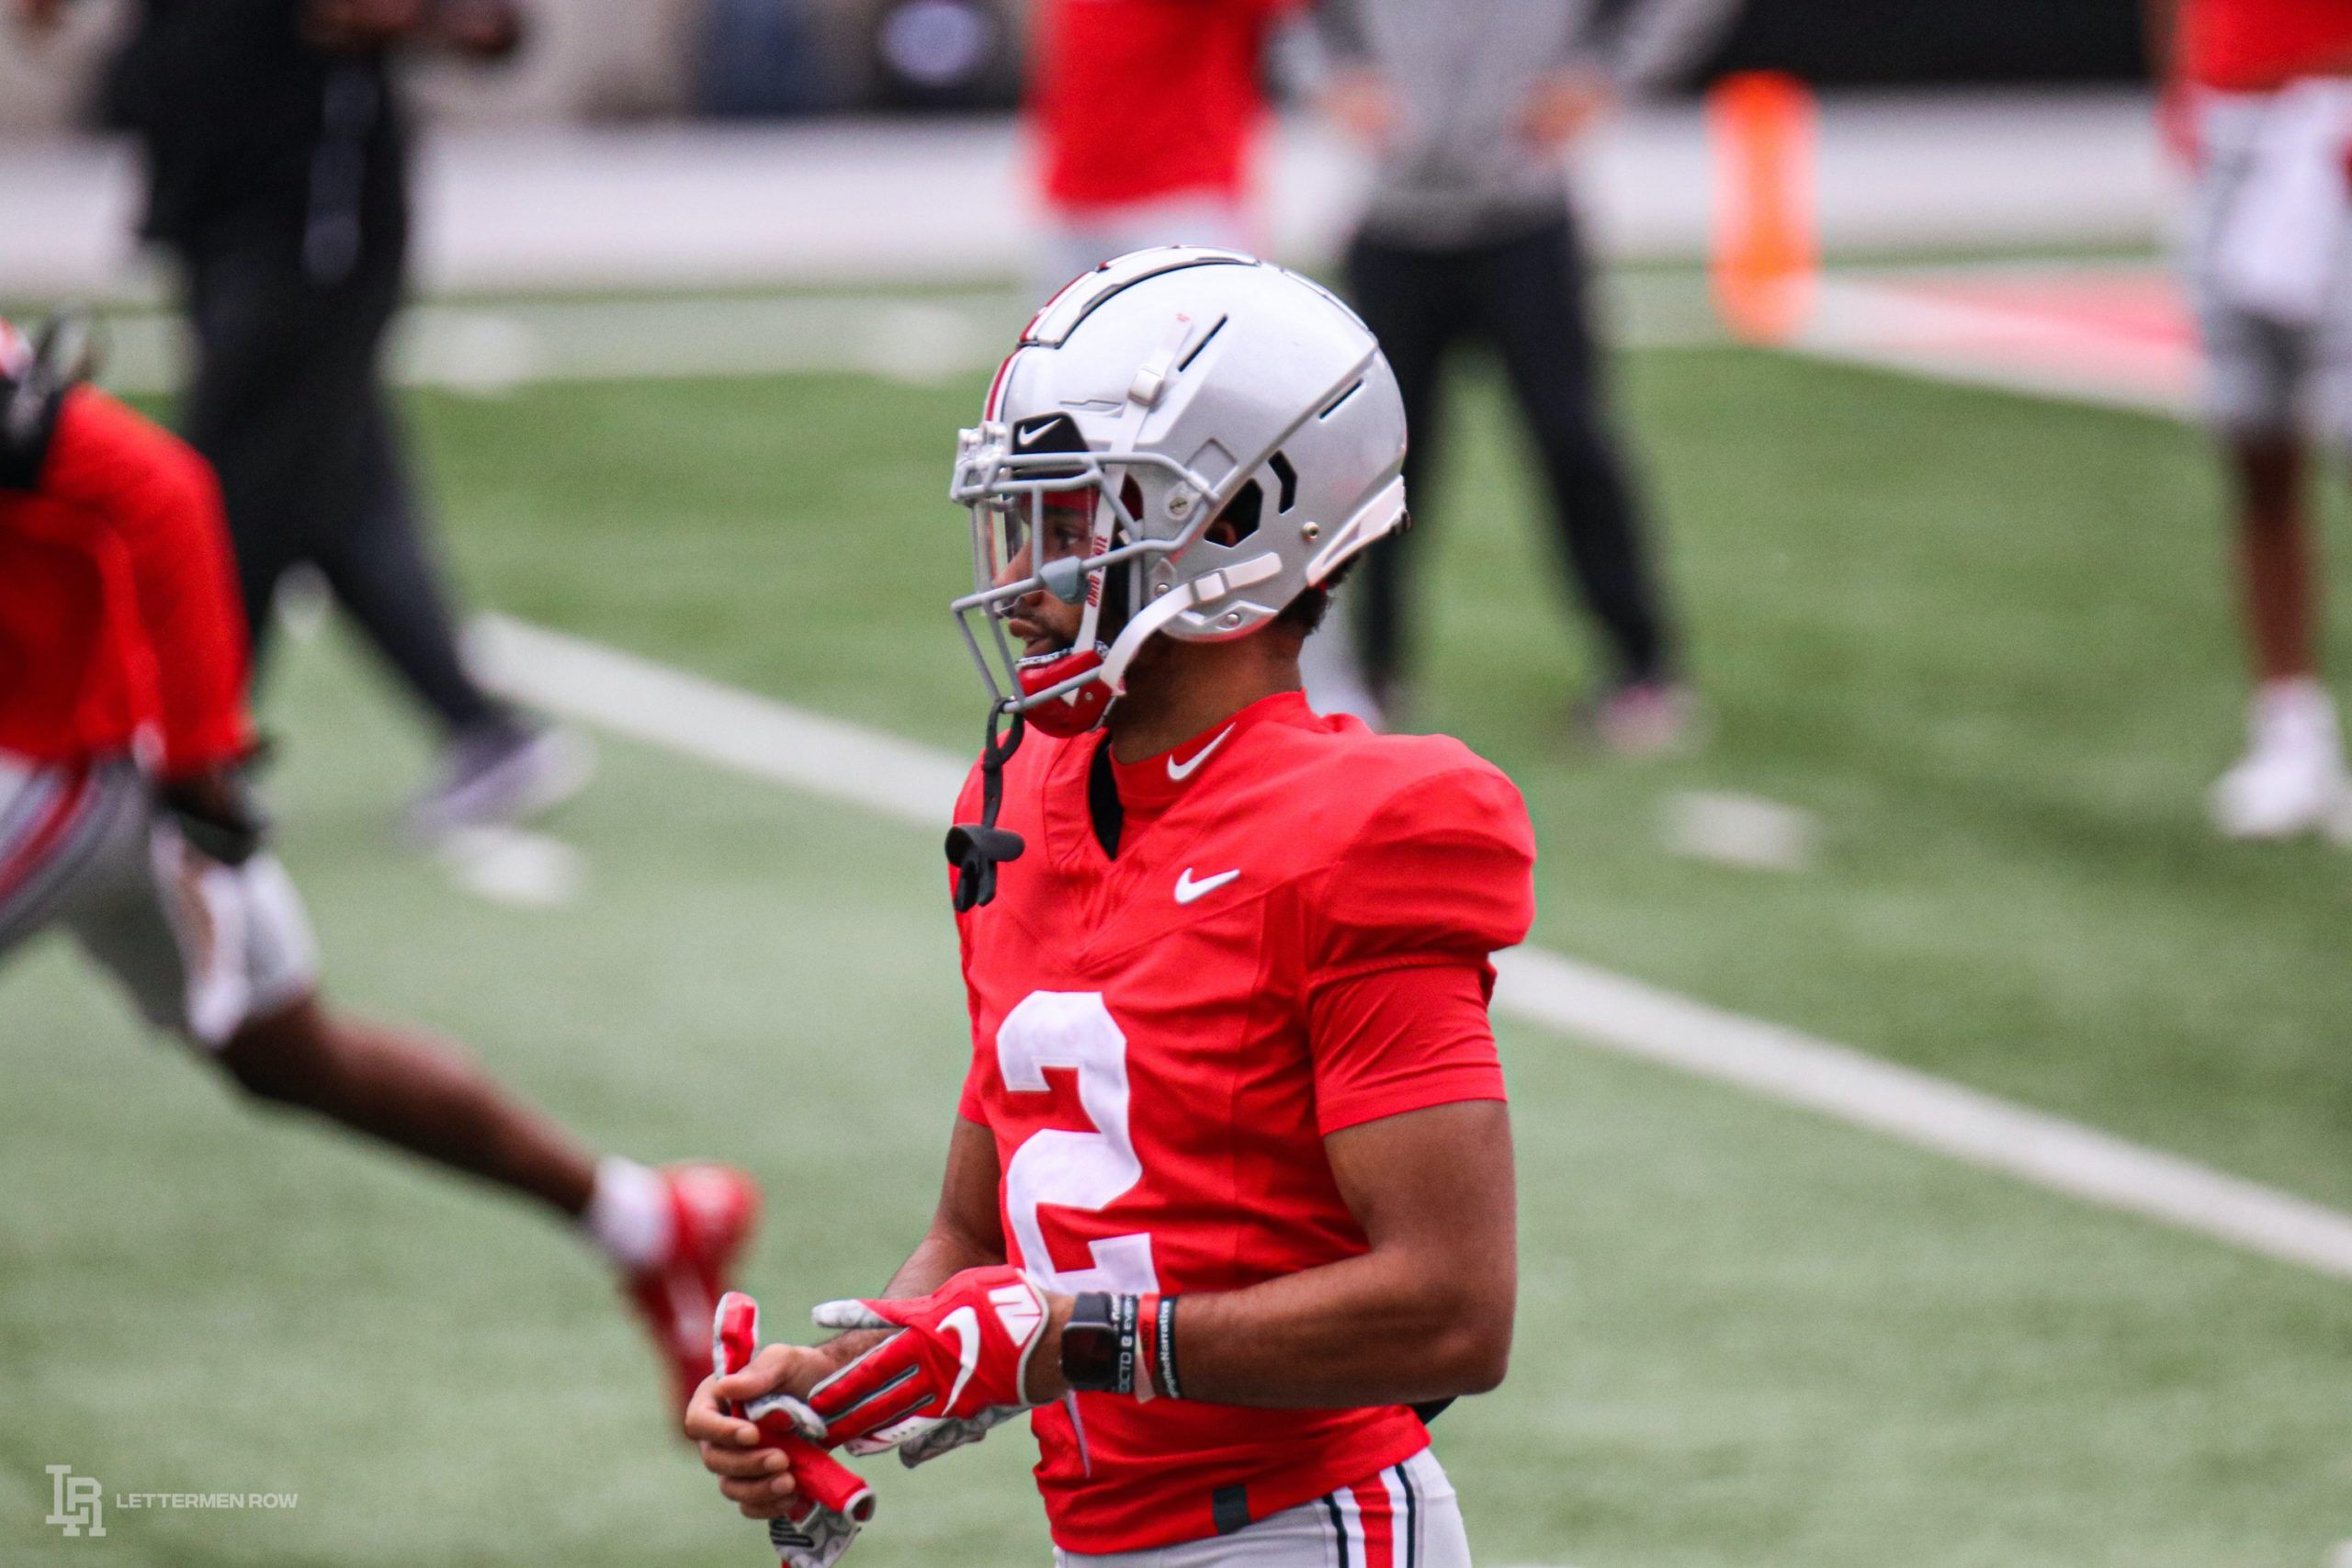 Ohio State: Chris Olave touchdown barrage shows no signs of slowing